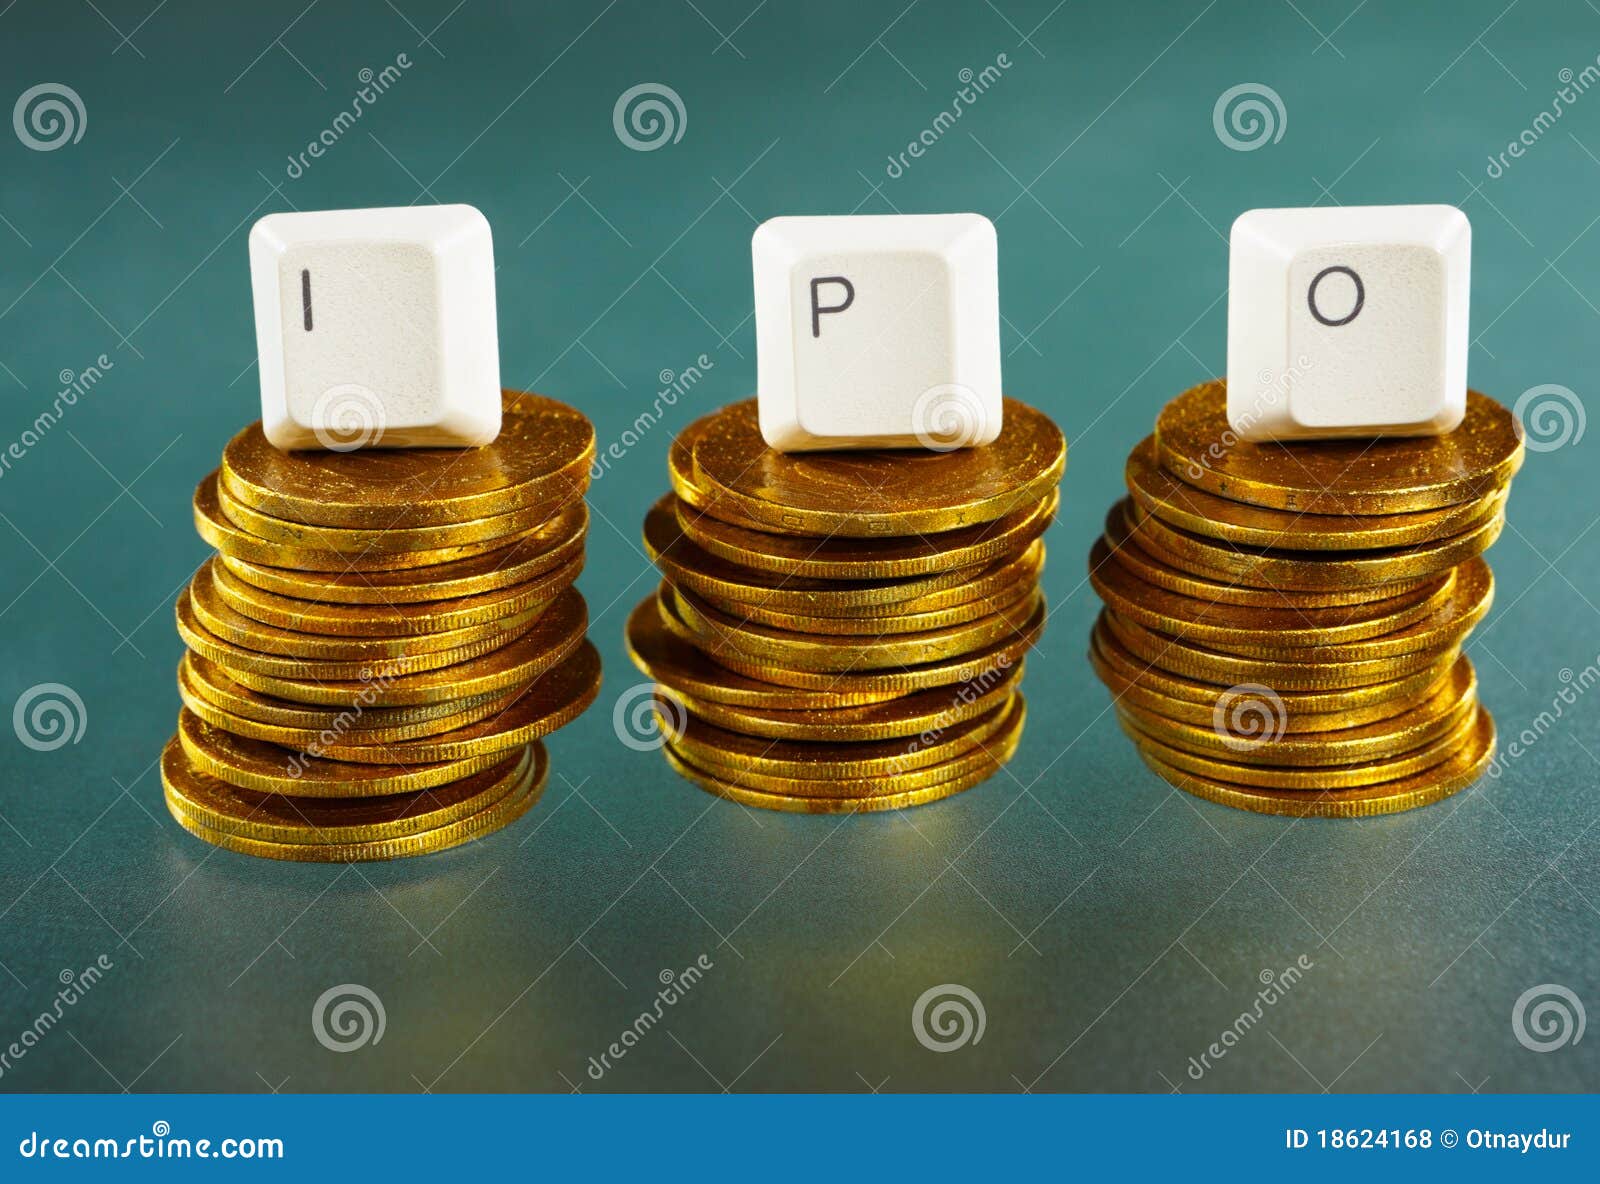 IPO Letter On Gold Coins Stack Stock Photo - Image of ...